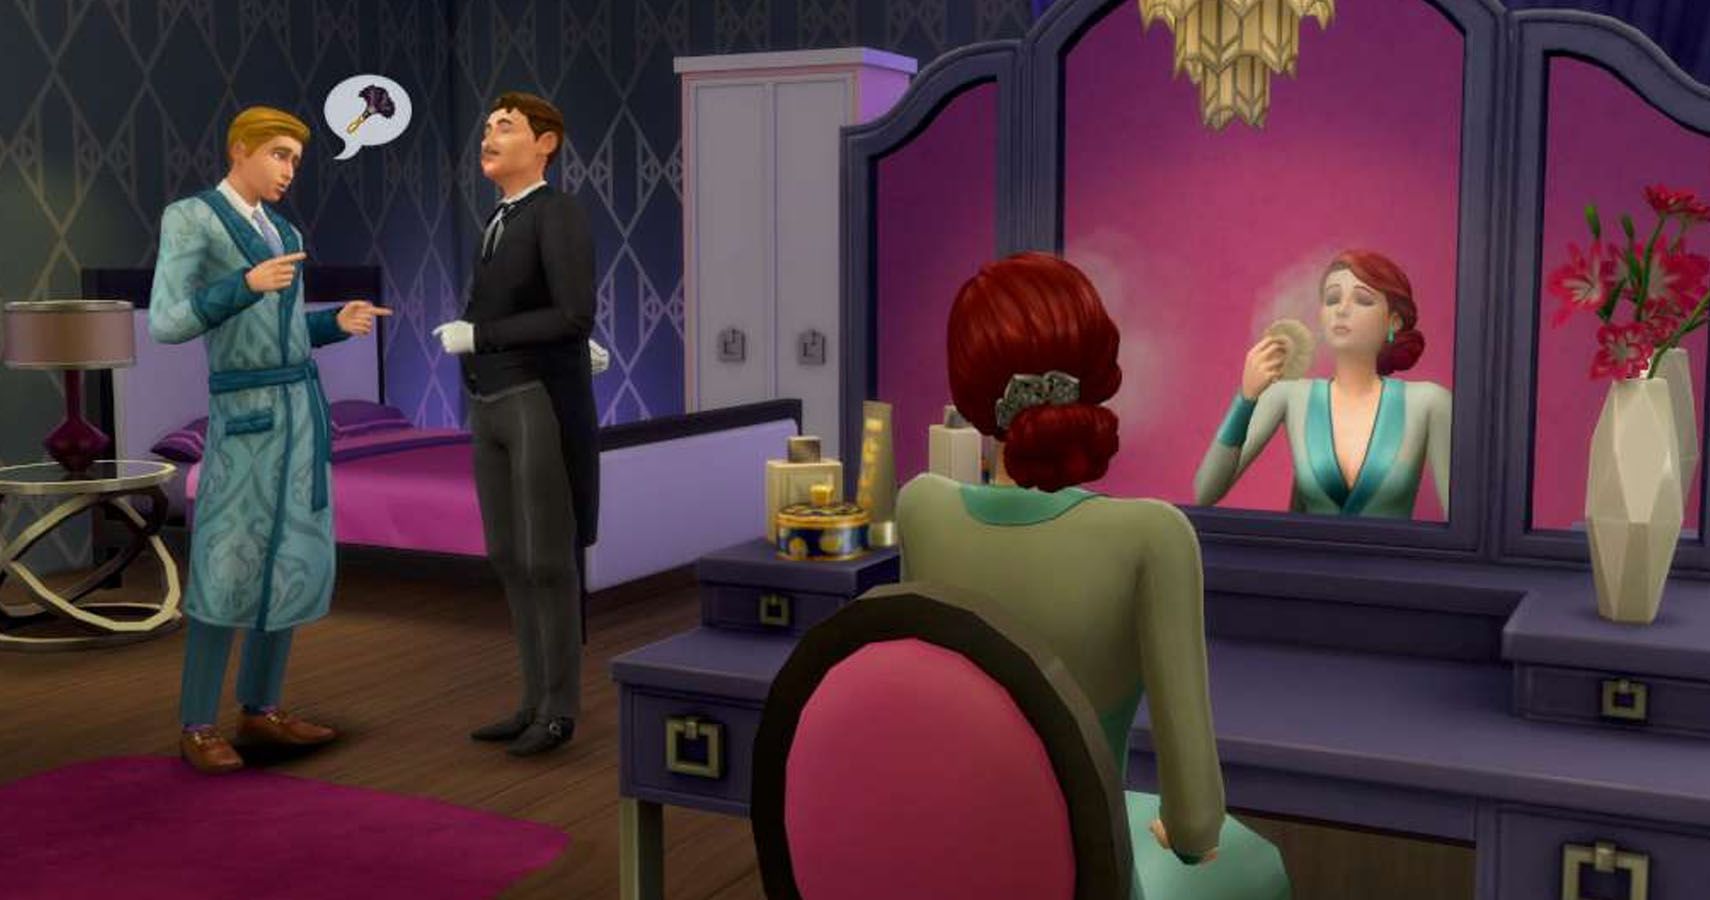 A sim putting on makeup with a butler behind her